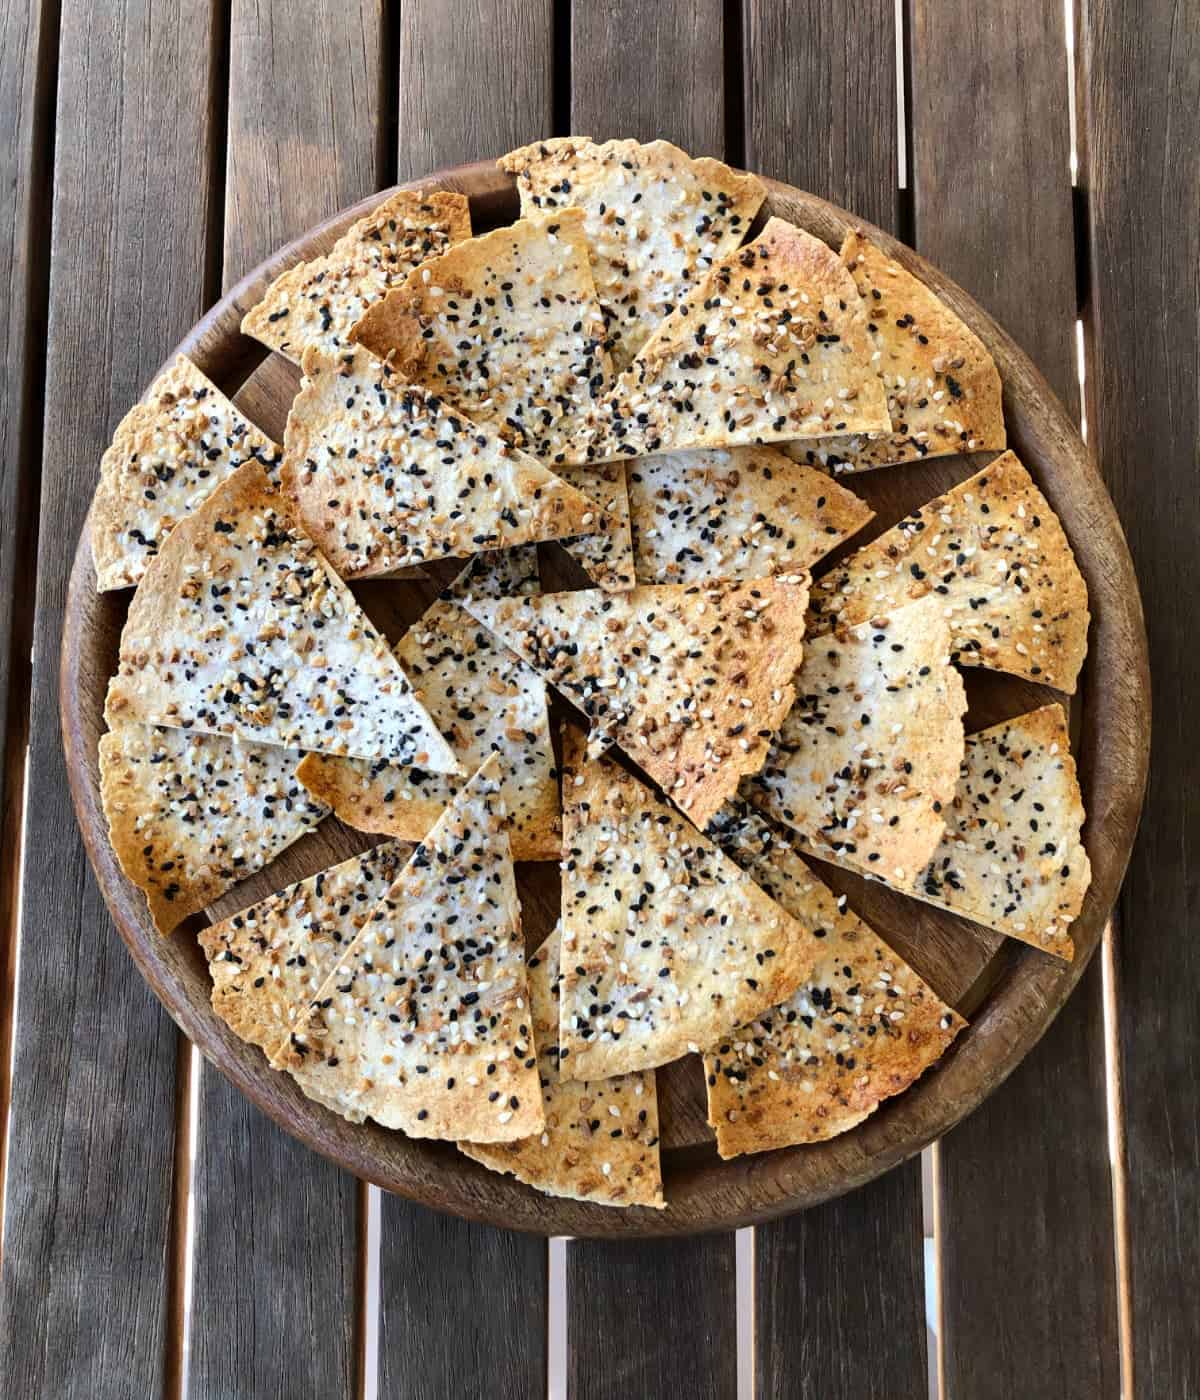 Homemade everything but the bagel seasoning snack chips on wood table.